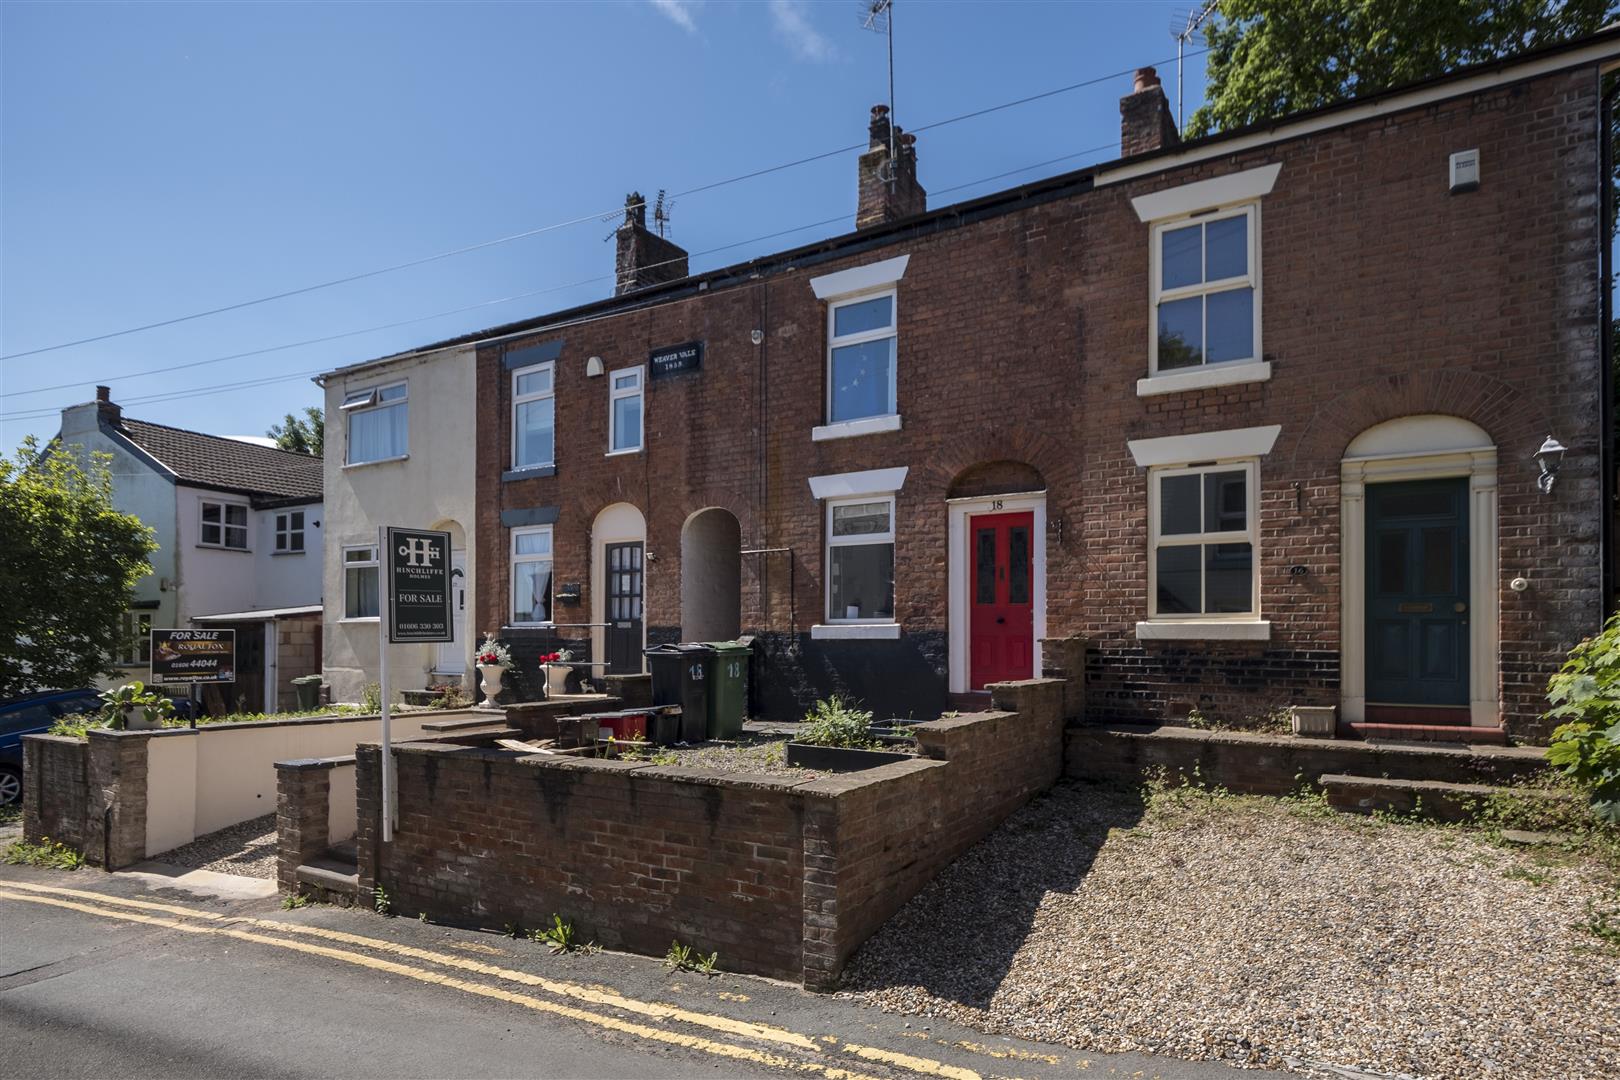 2 bedroom  Terraced House for Sale in Northwich